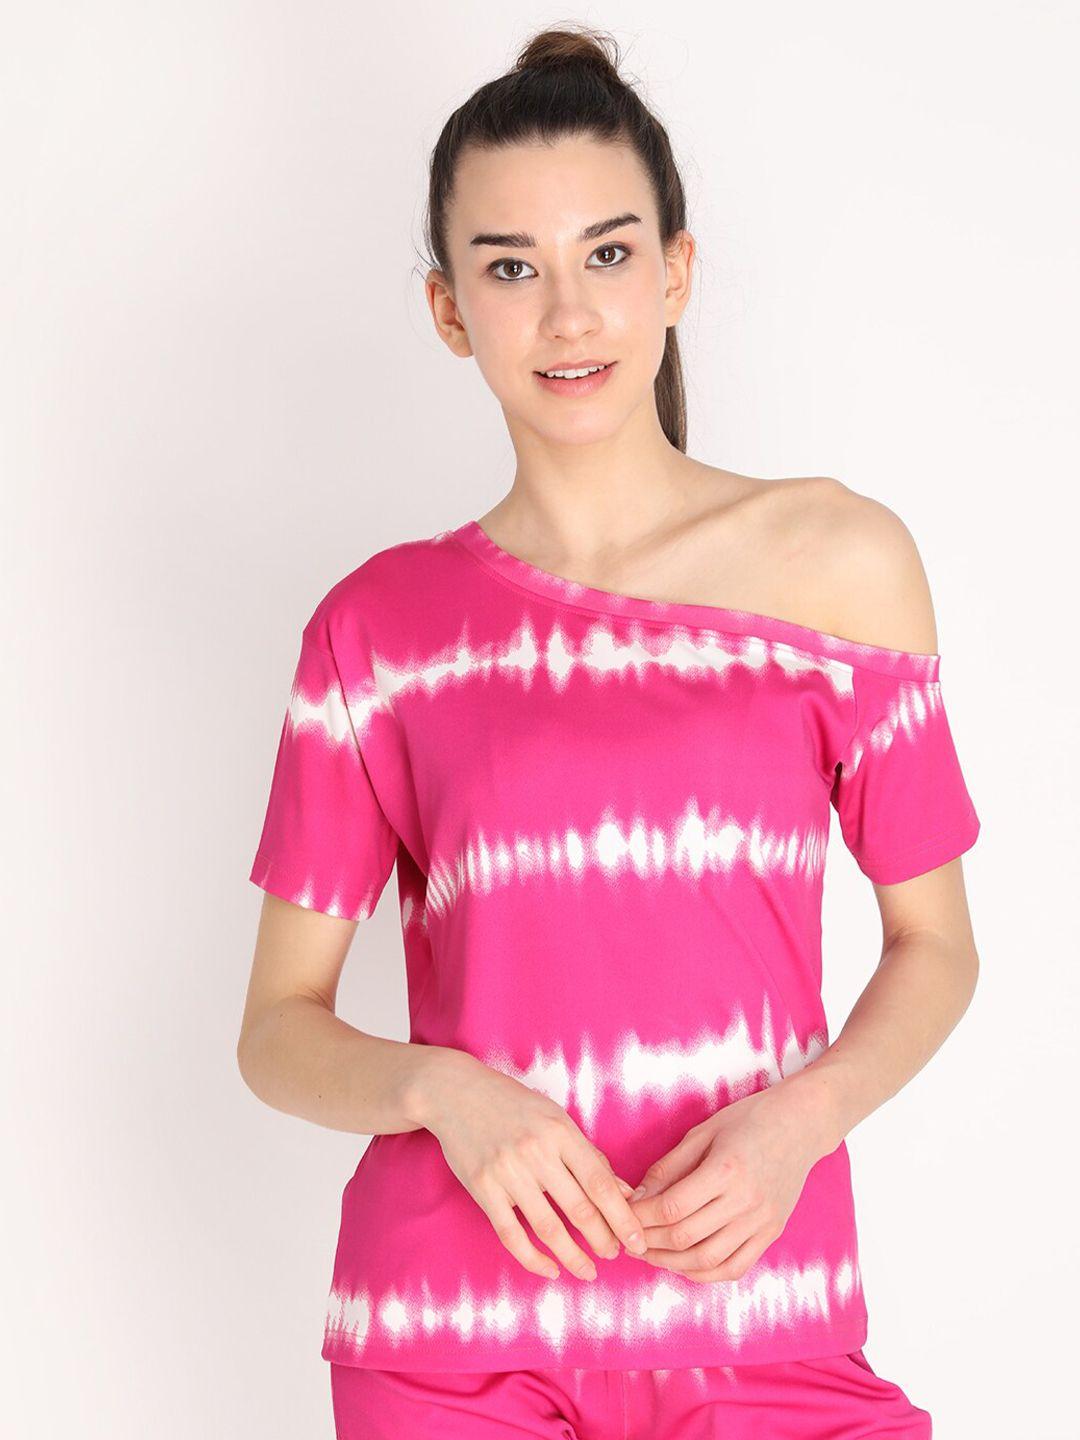 chkokko-pink-&-white-tie-and-dye-one-shoulder-top